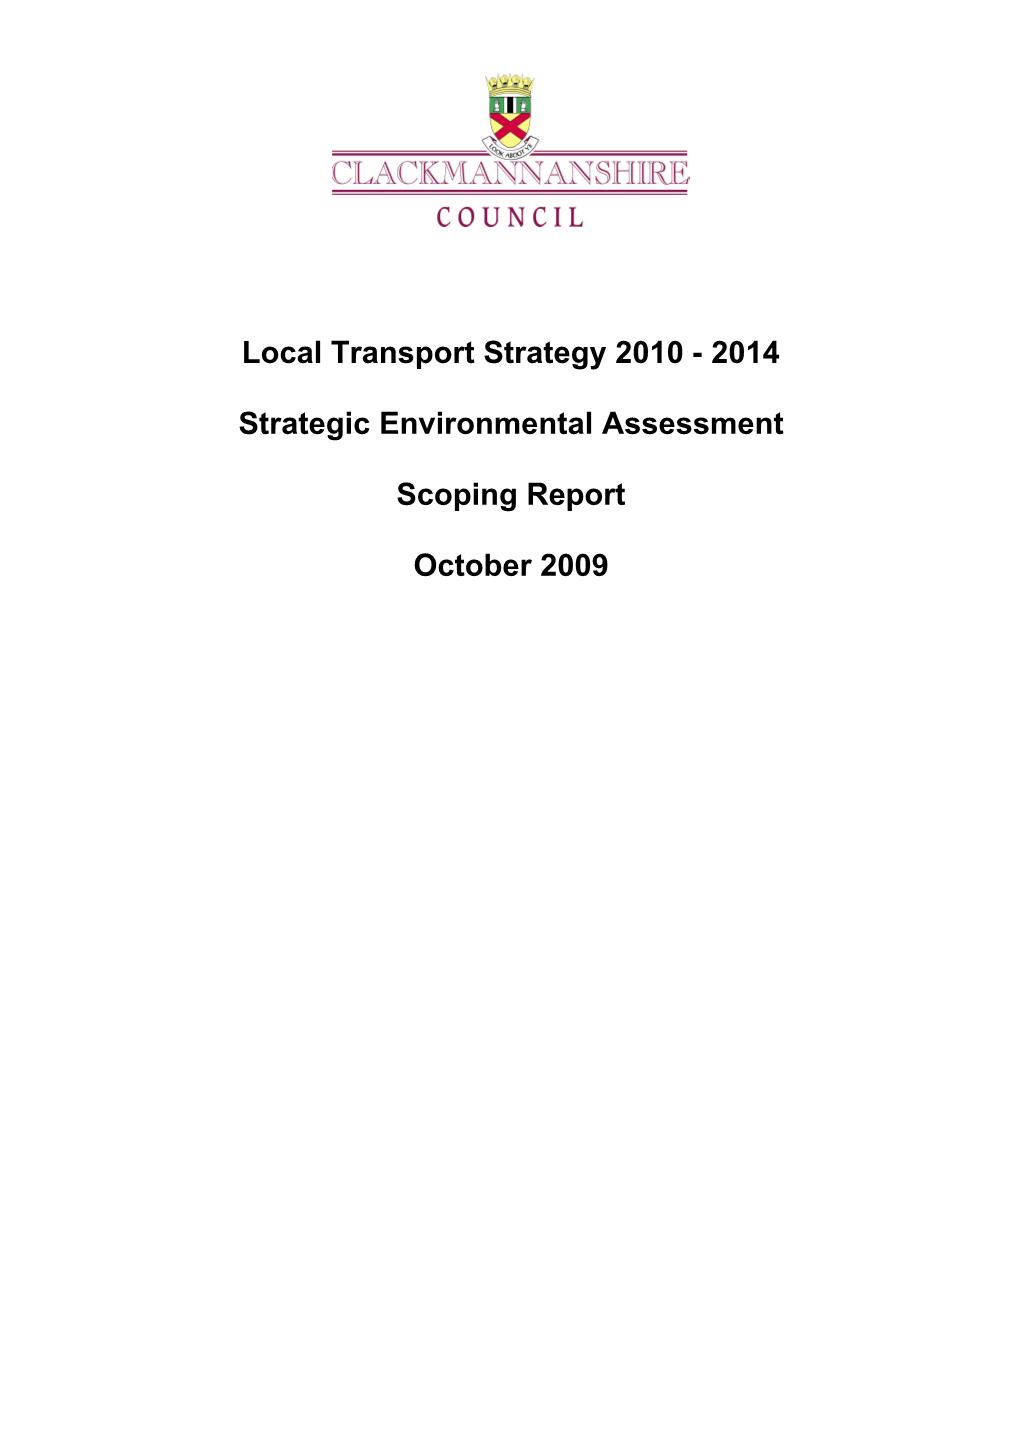 Local Transport Strategy 2010 - 2014